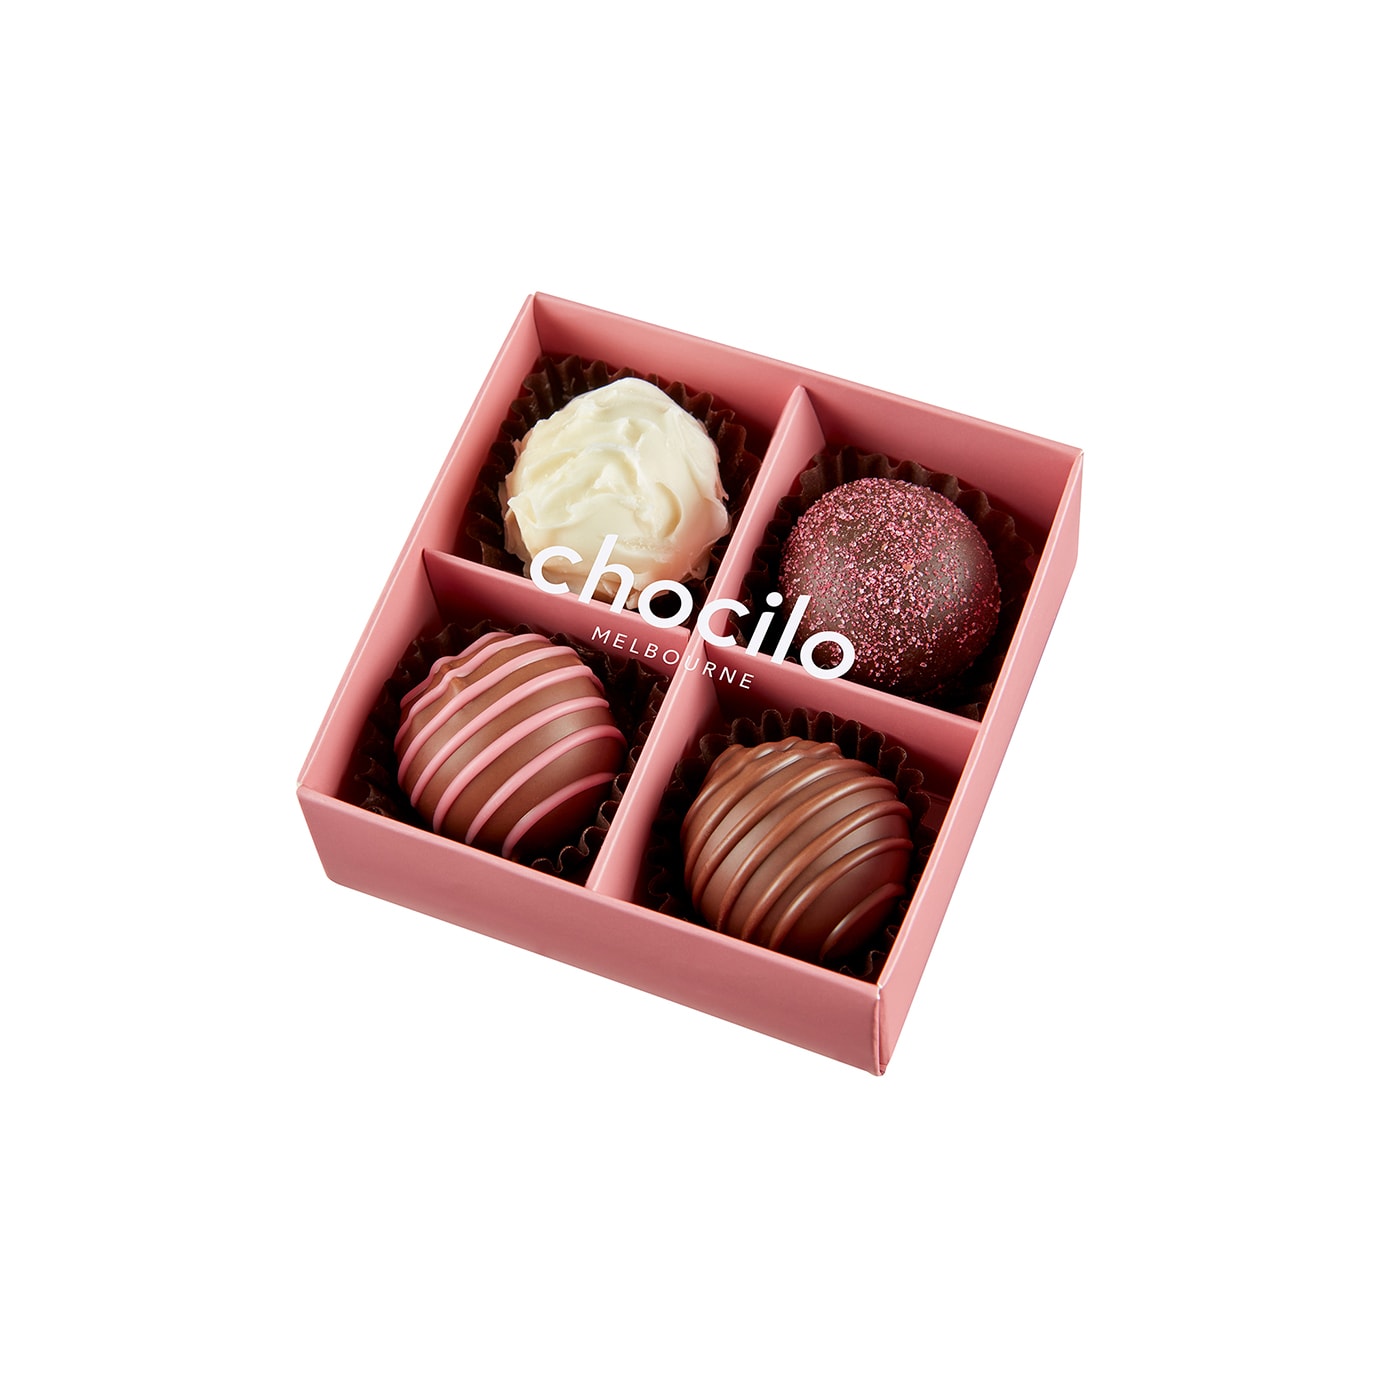 Chocilo Melbourne 4 pack premium chocolate truffles packaged in a dusty pink gift box with clear lid.